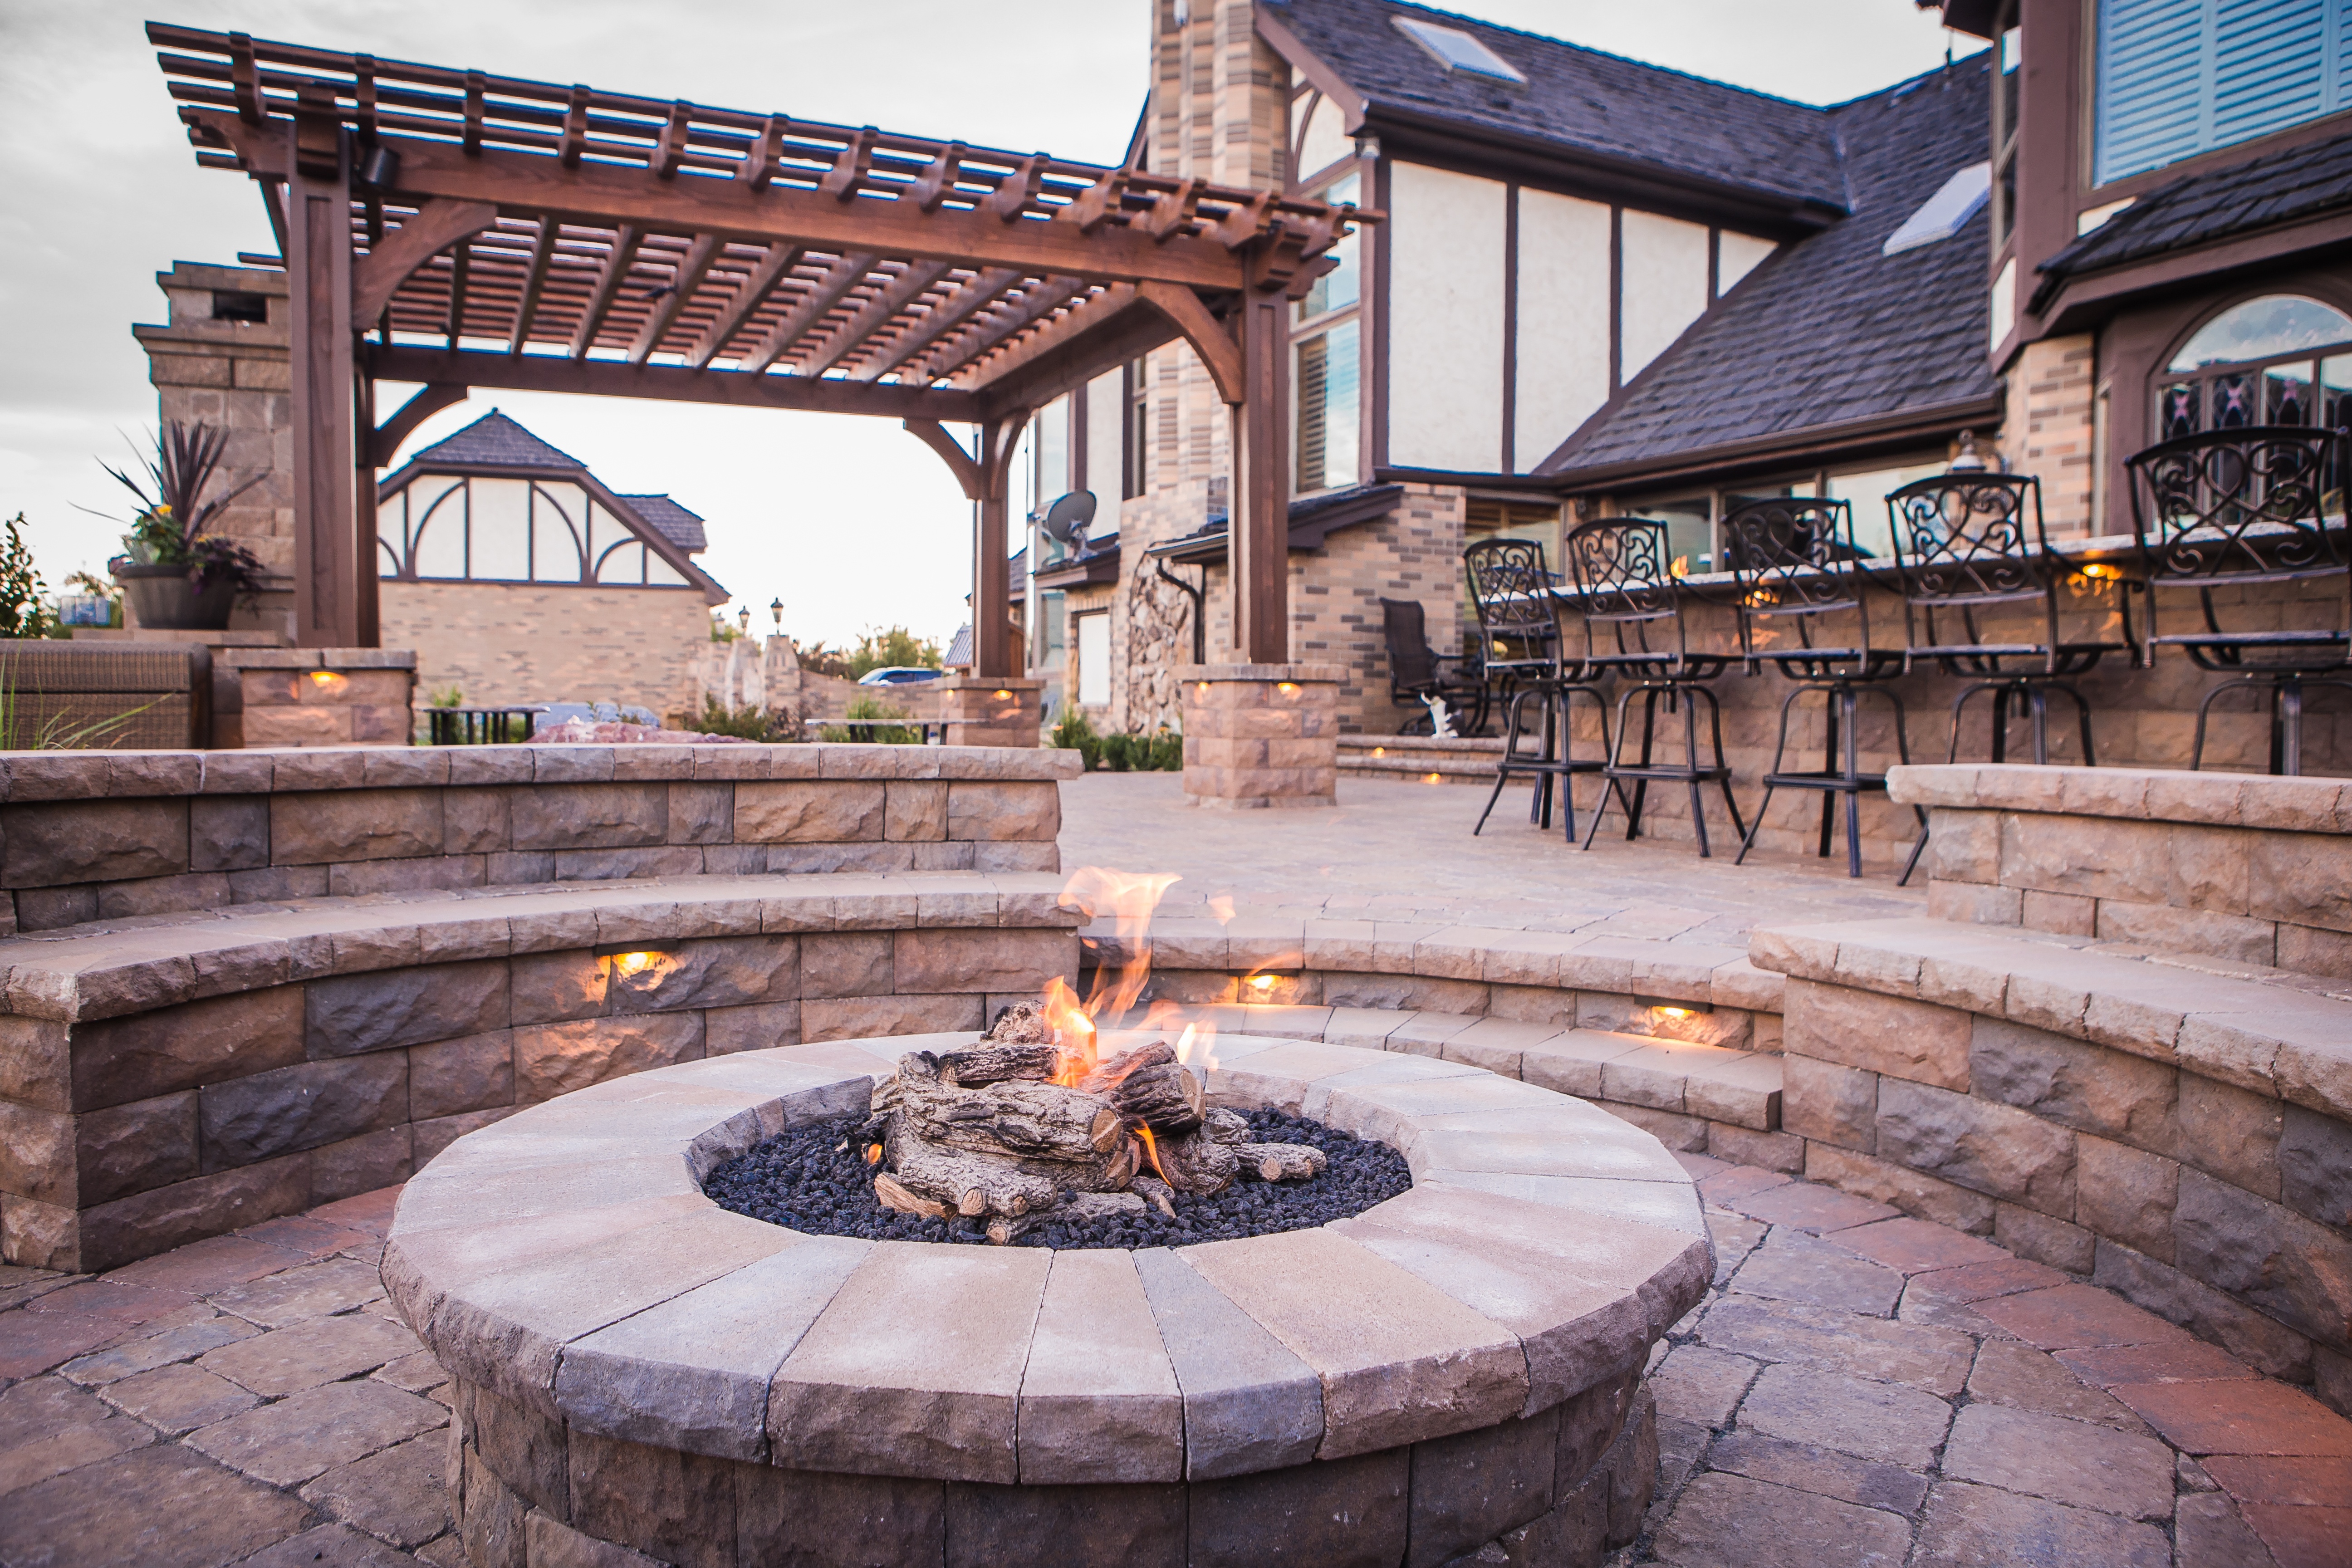 Backyard Fire Pits The Ultimate Guide, Fire Pit Standard Size